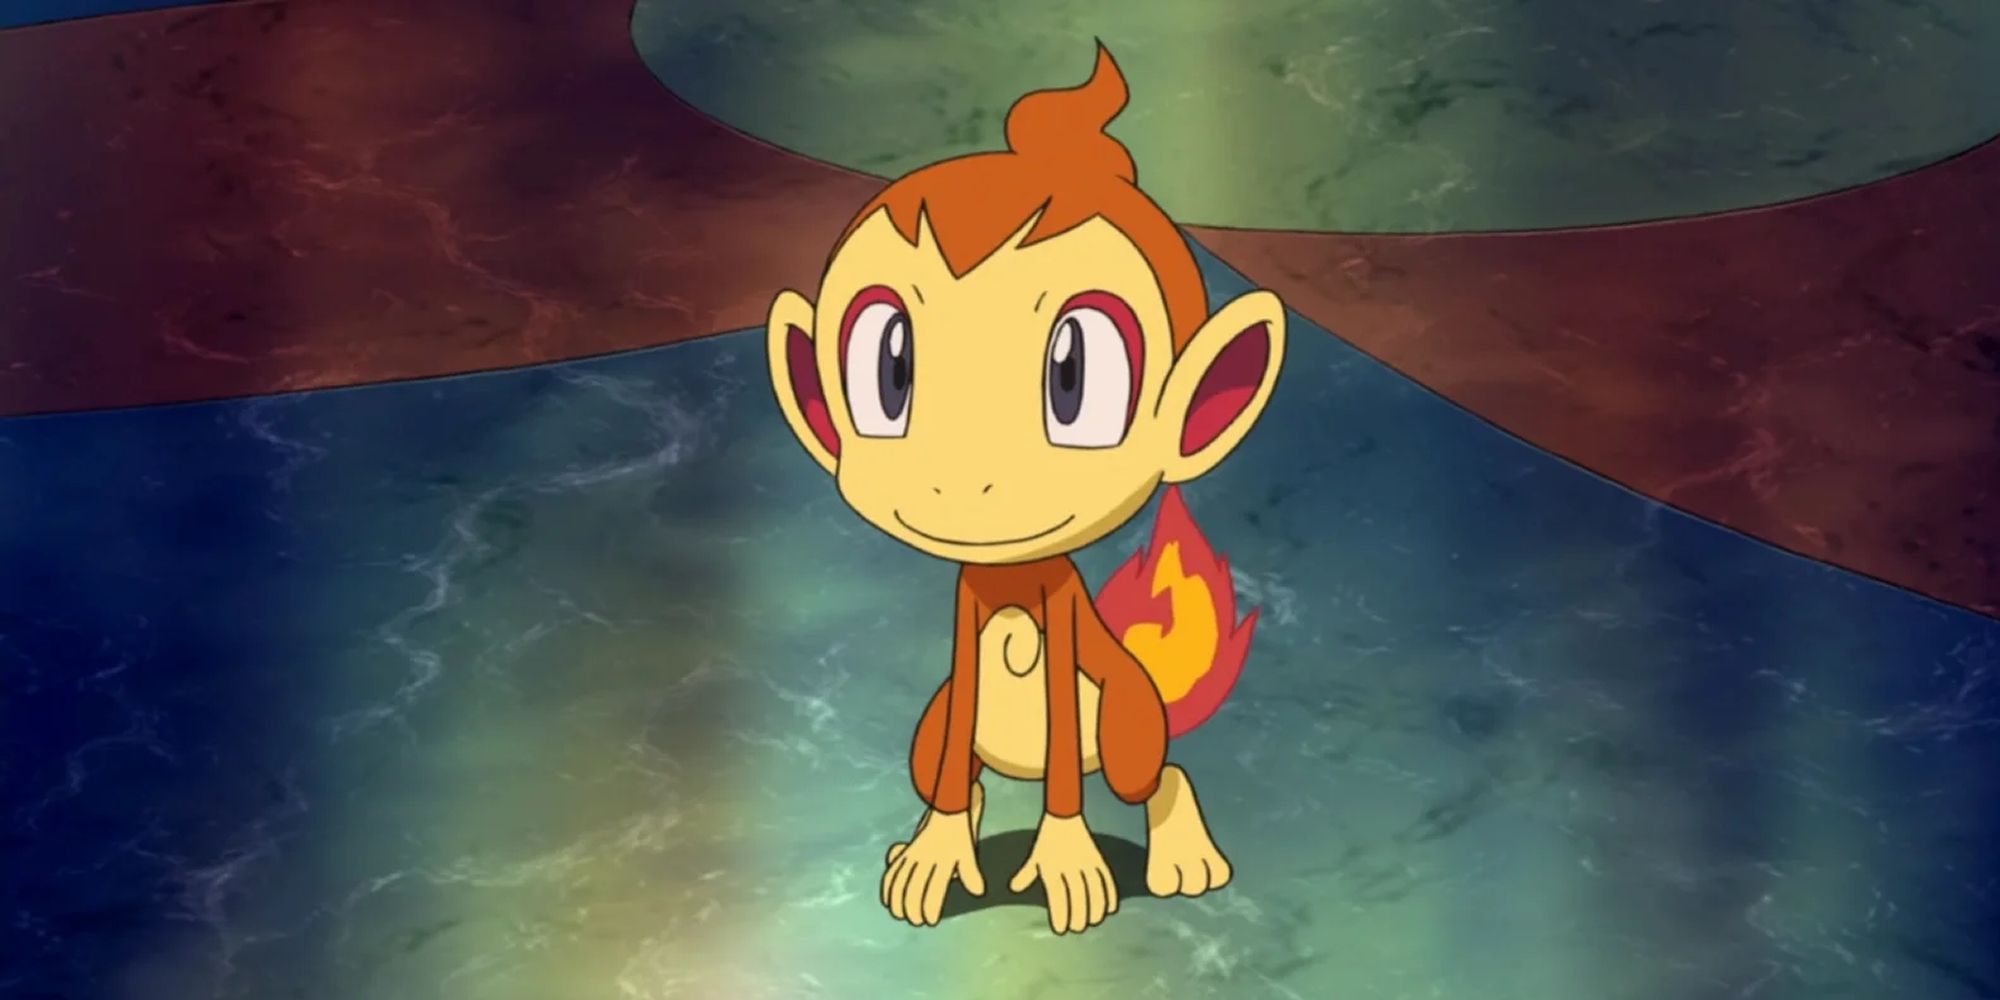 An Innocent Chimchar Looking Up